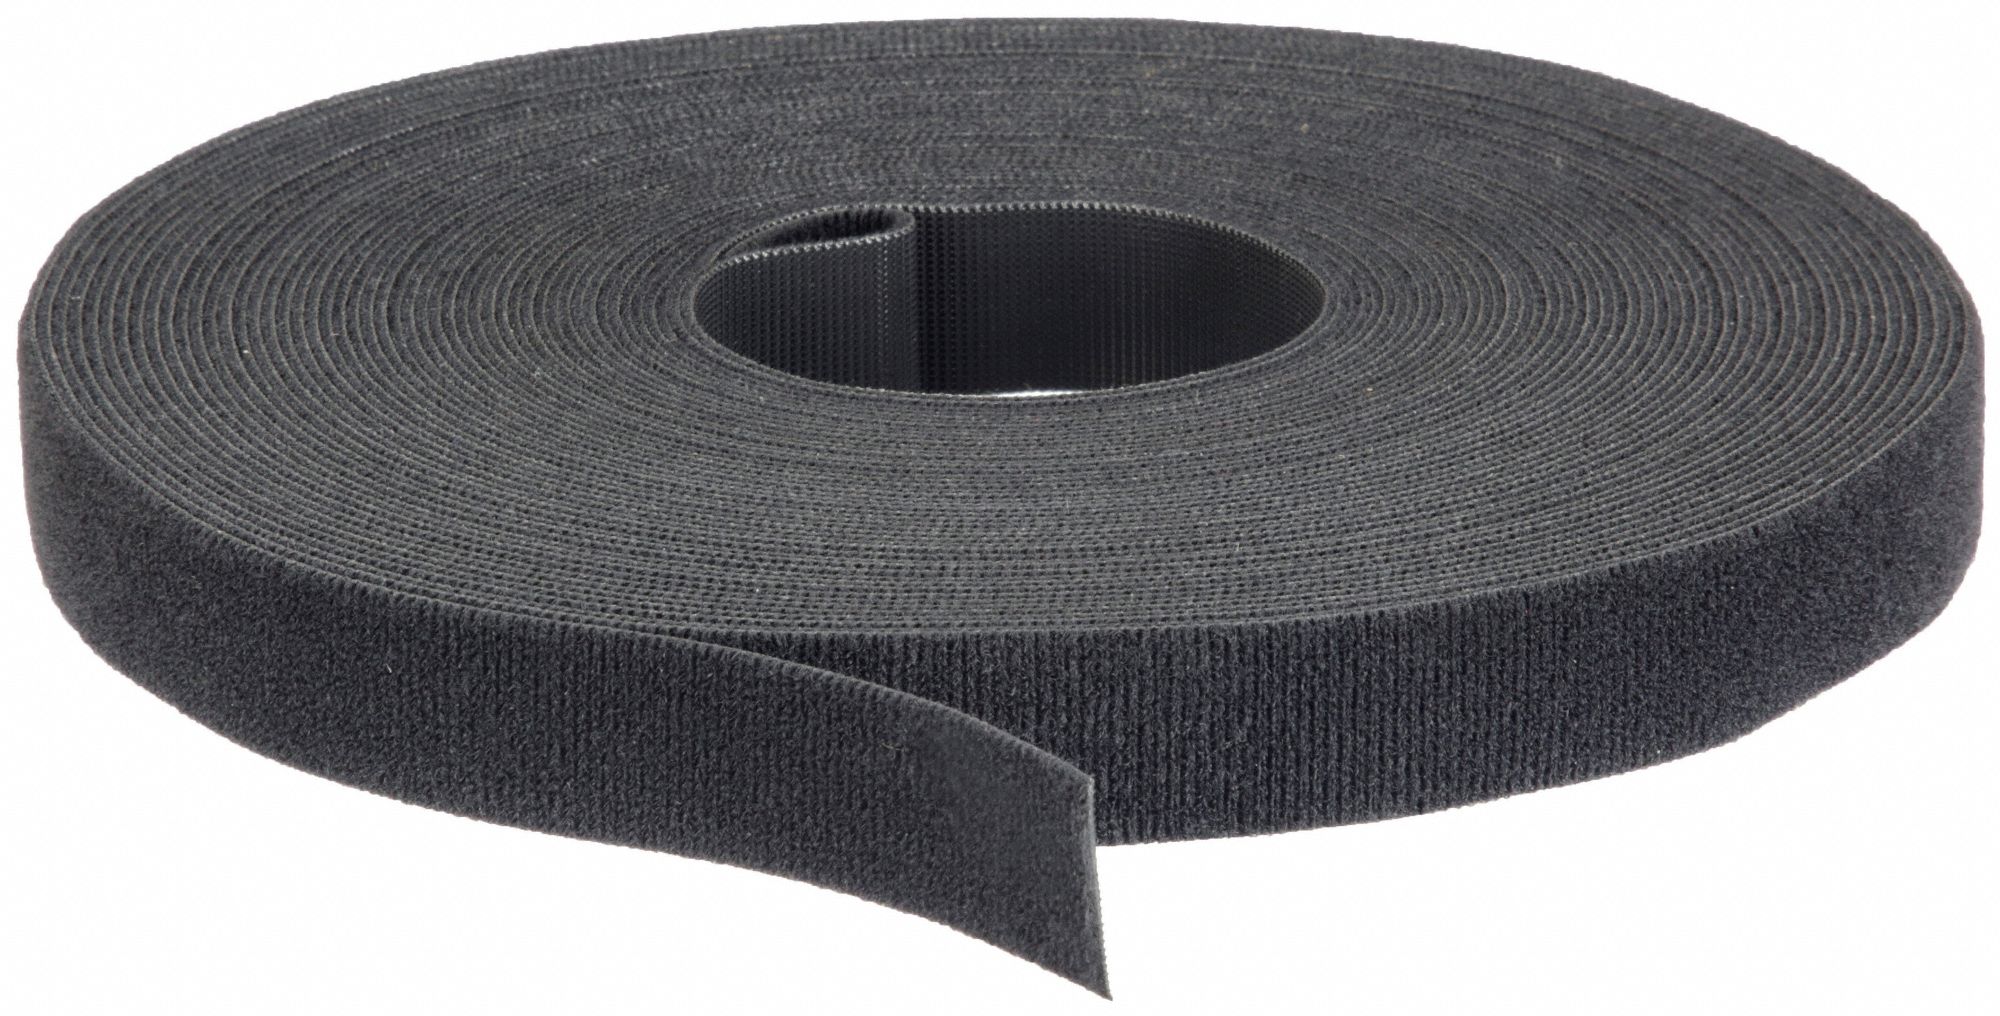 VELCRO BRAND Hook-and-Loop Cable Tie Roll: 75 ft Lg, 0.75 in Wd, 29 lb  Tensile Strength, Black